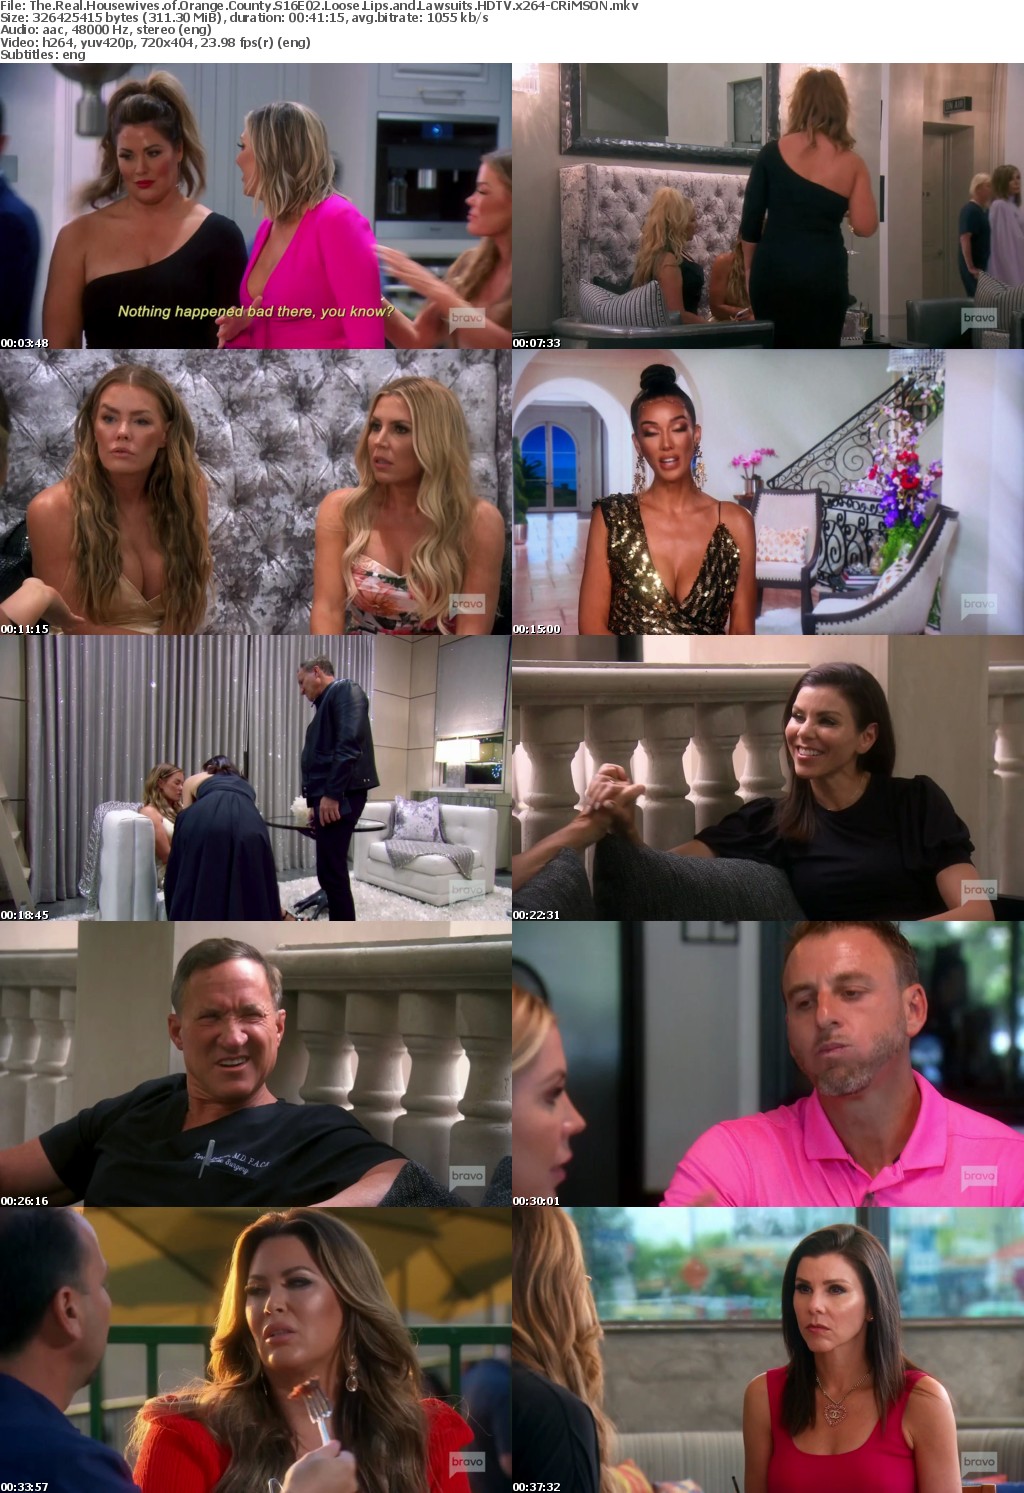 The Real Housewives of Orange County S16E02 Loose Lips and Lawsuits HDTV x264-CRiMSON